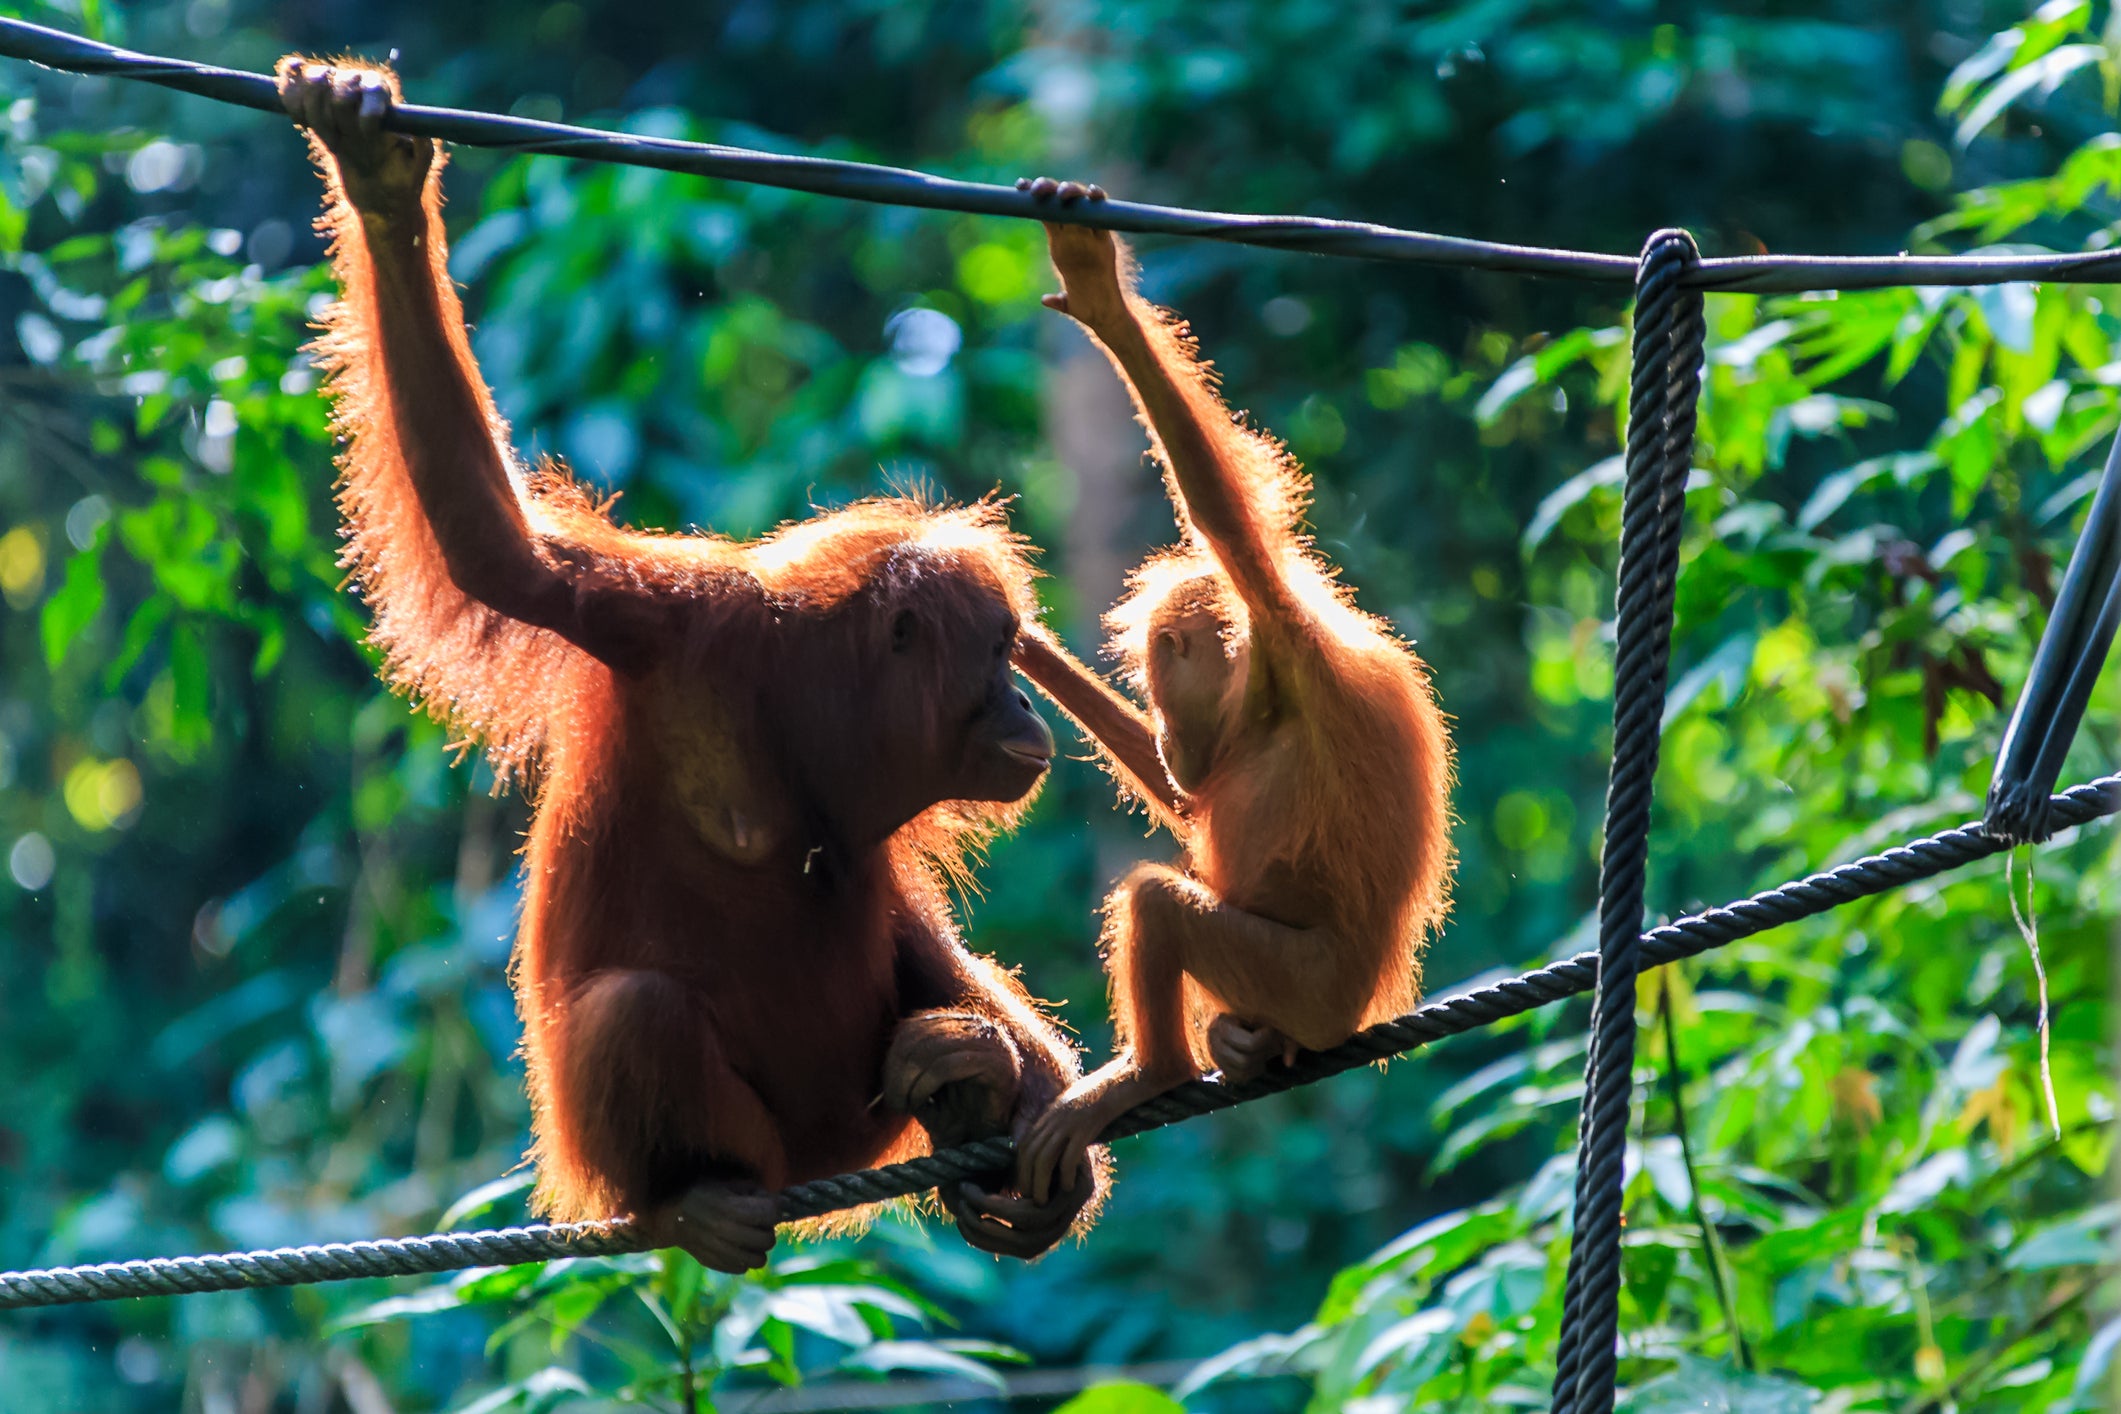 Hang around with mummy and baby orangutans when you visit Borneo